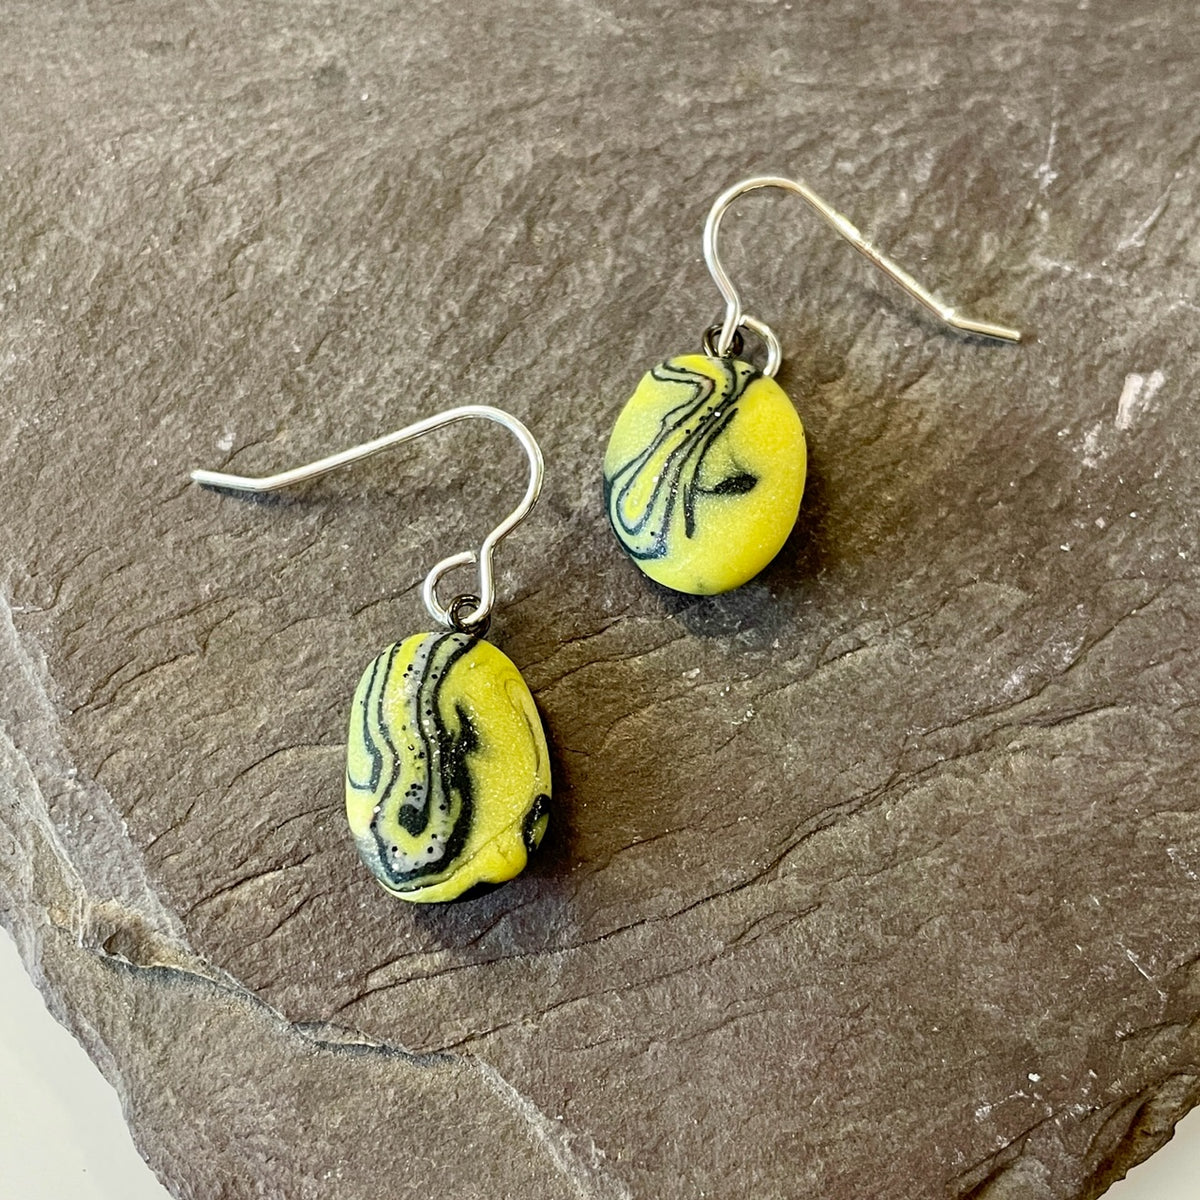 Black and Yellow Pebble earrings By Elaine Christmas 